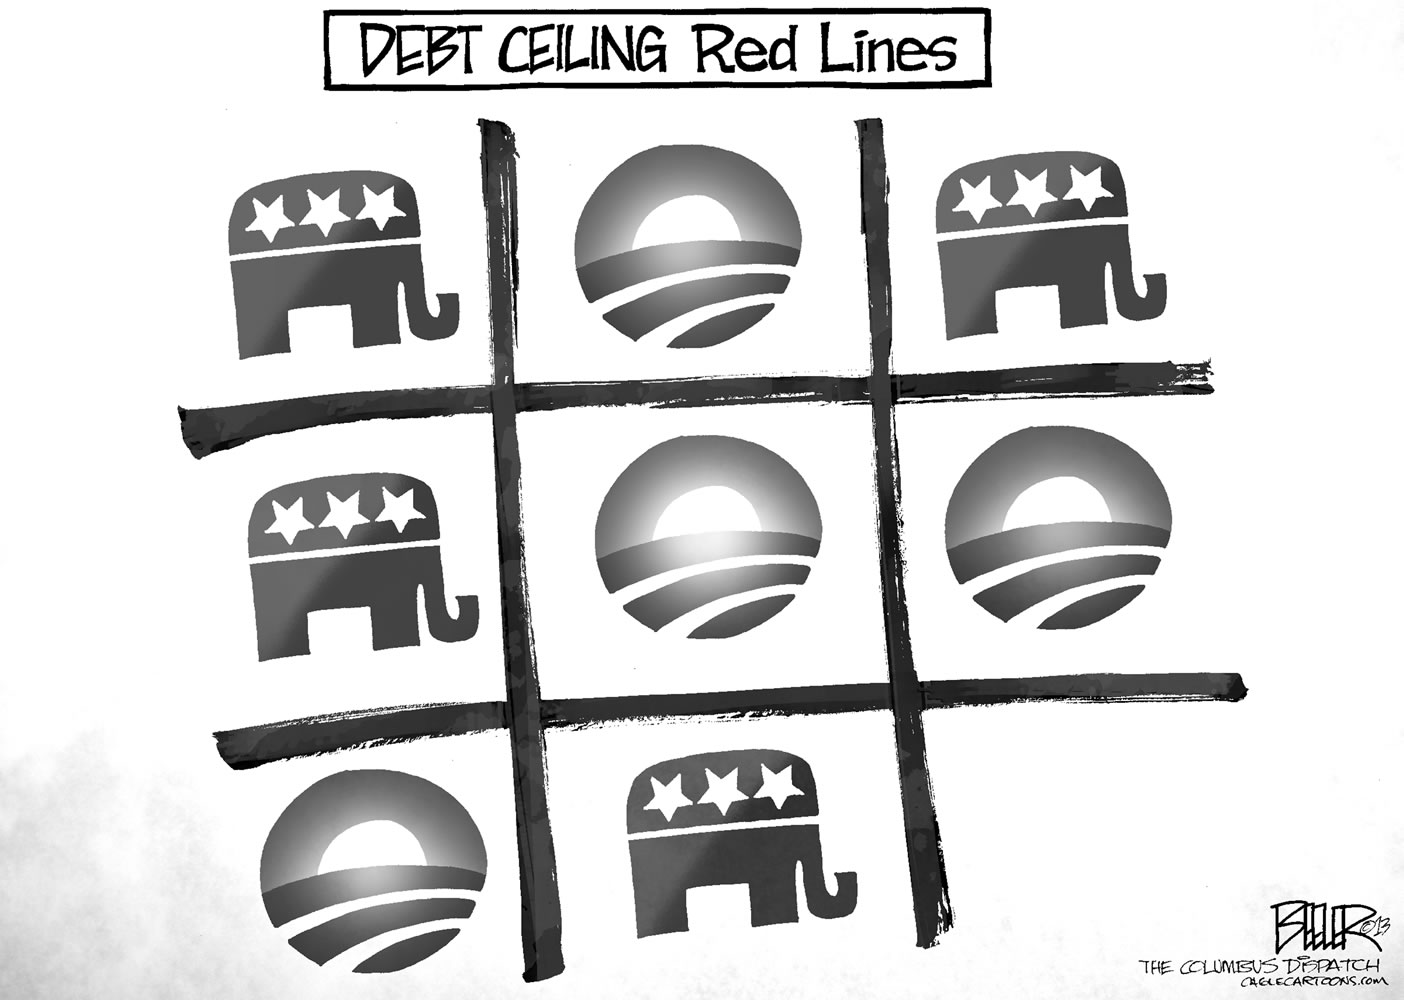 Debt ceiling red lines